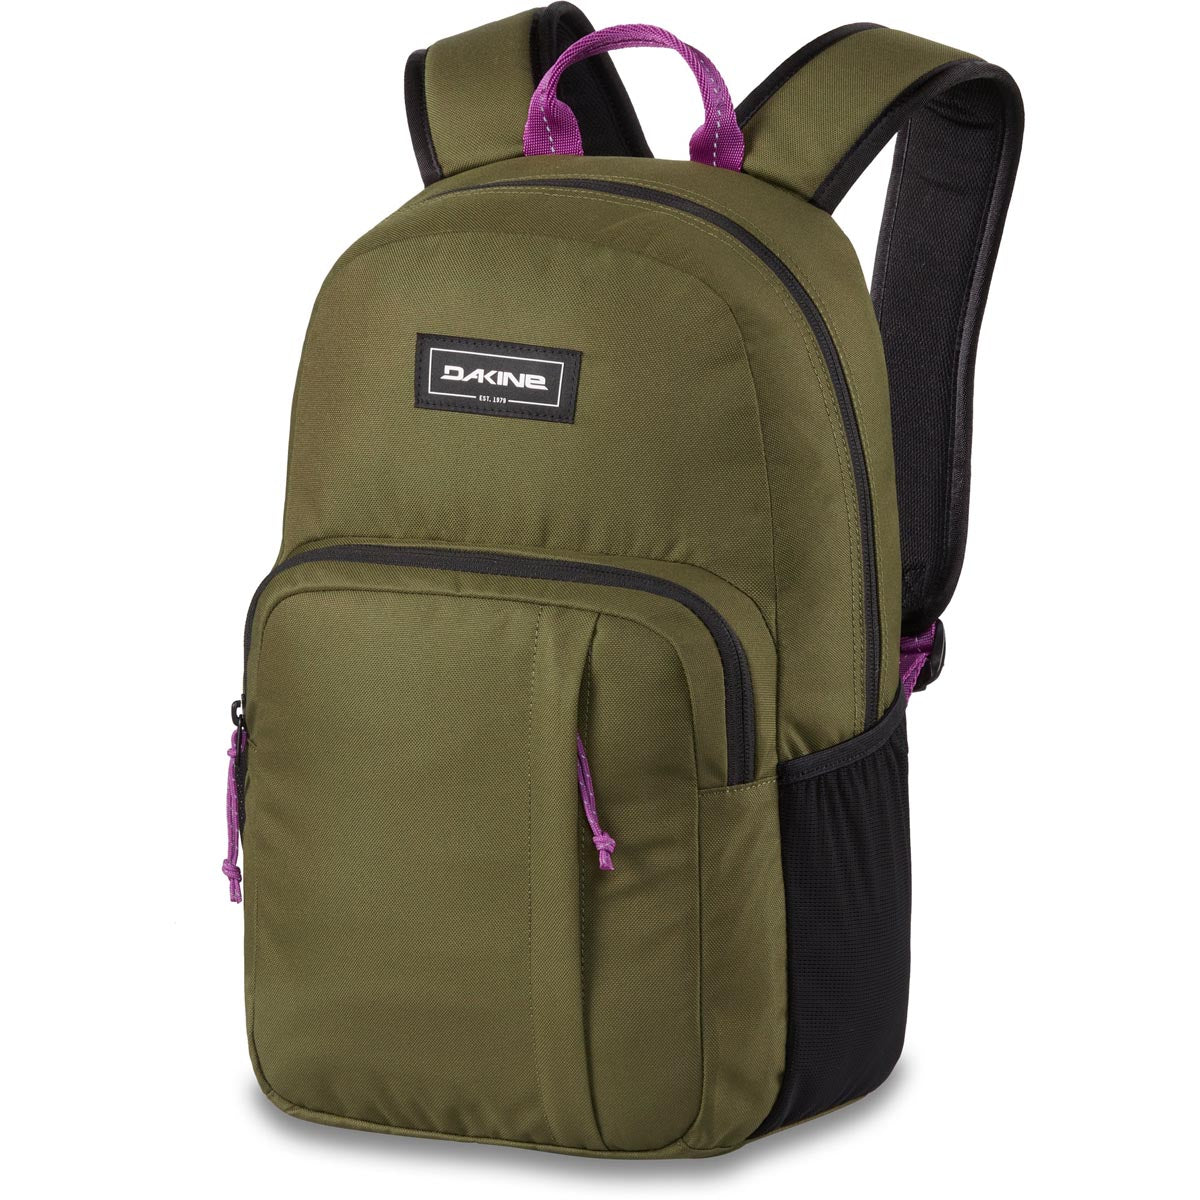 Dakine Youth Campus Pack 18l Backpack - Jungle Punch image 1